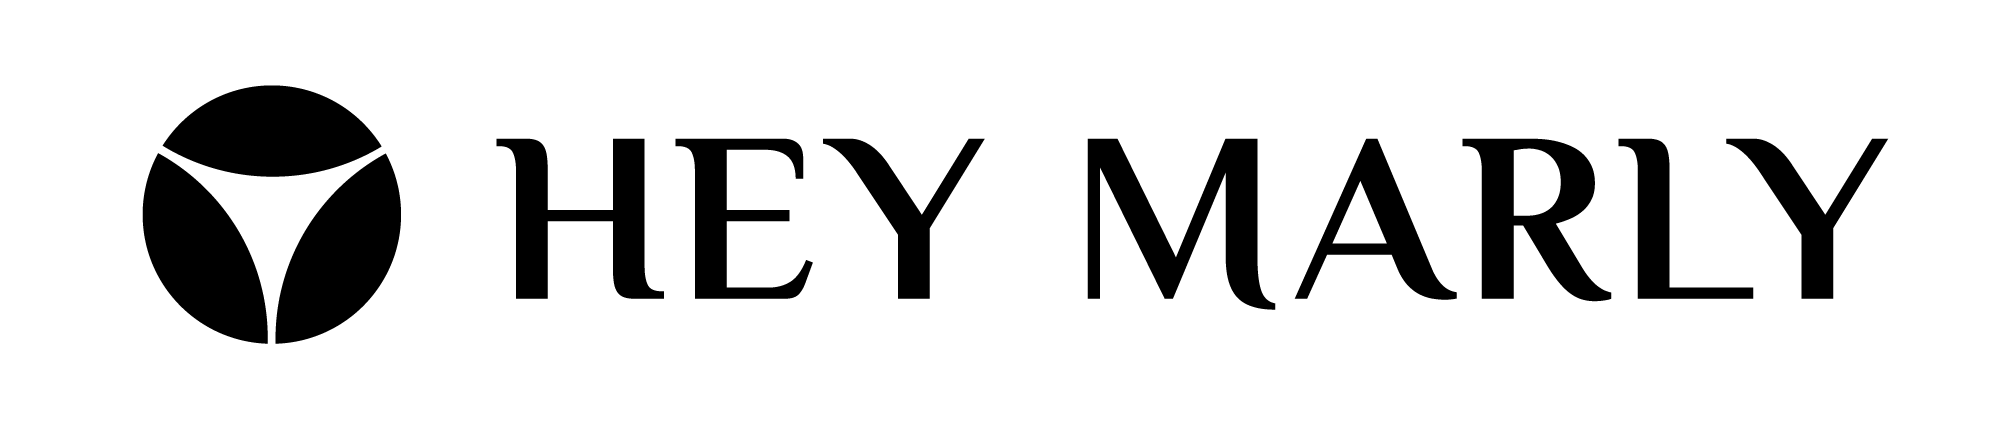 Hey Marly Support logo